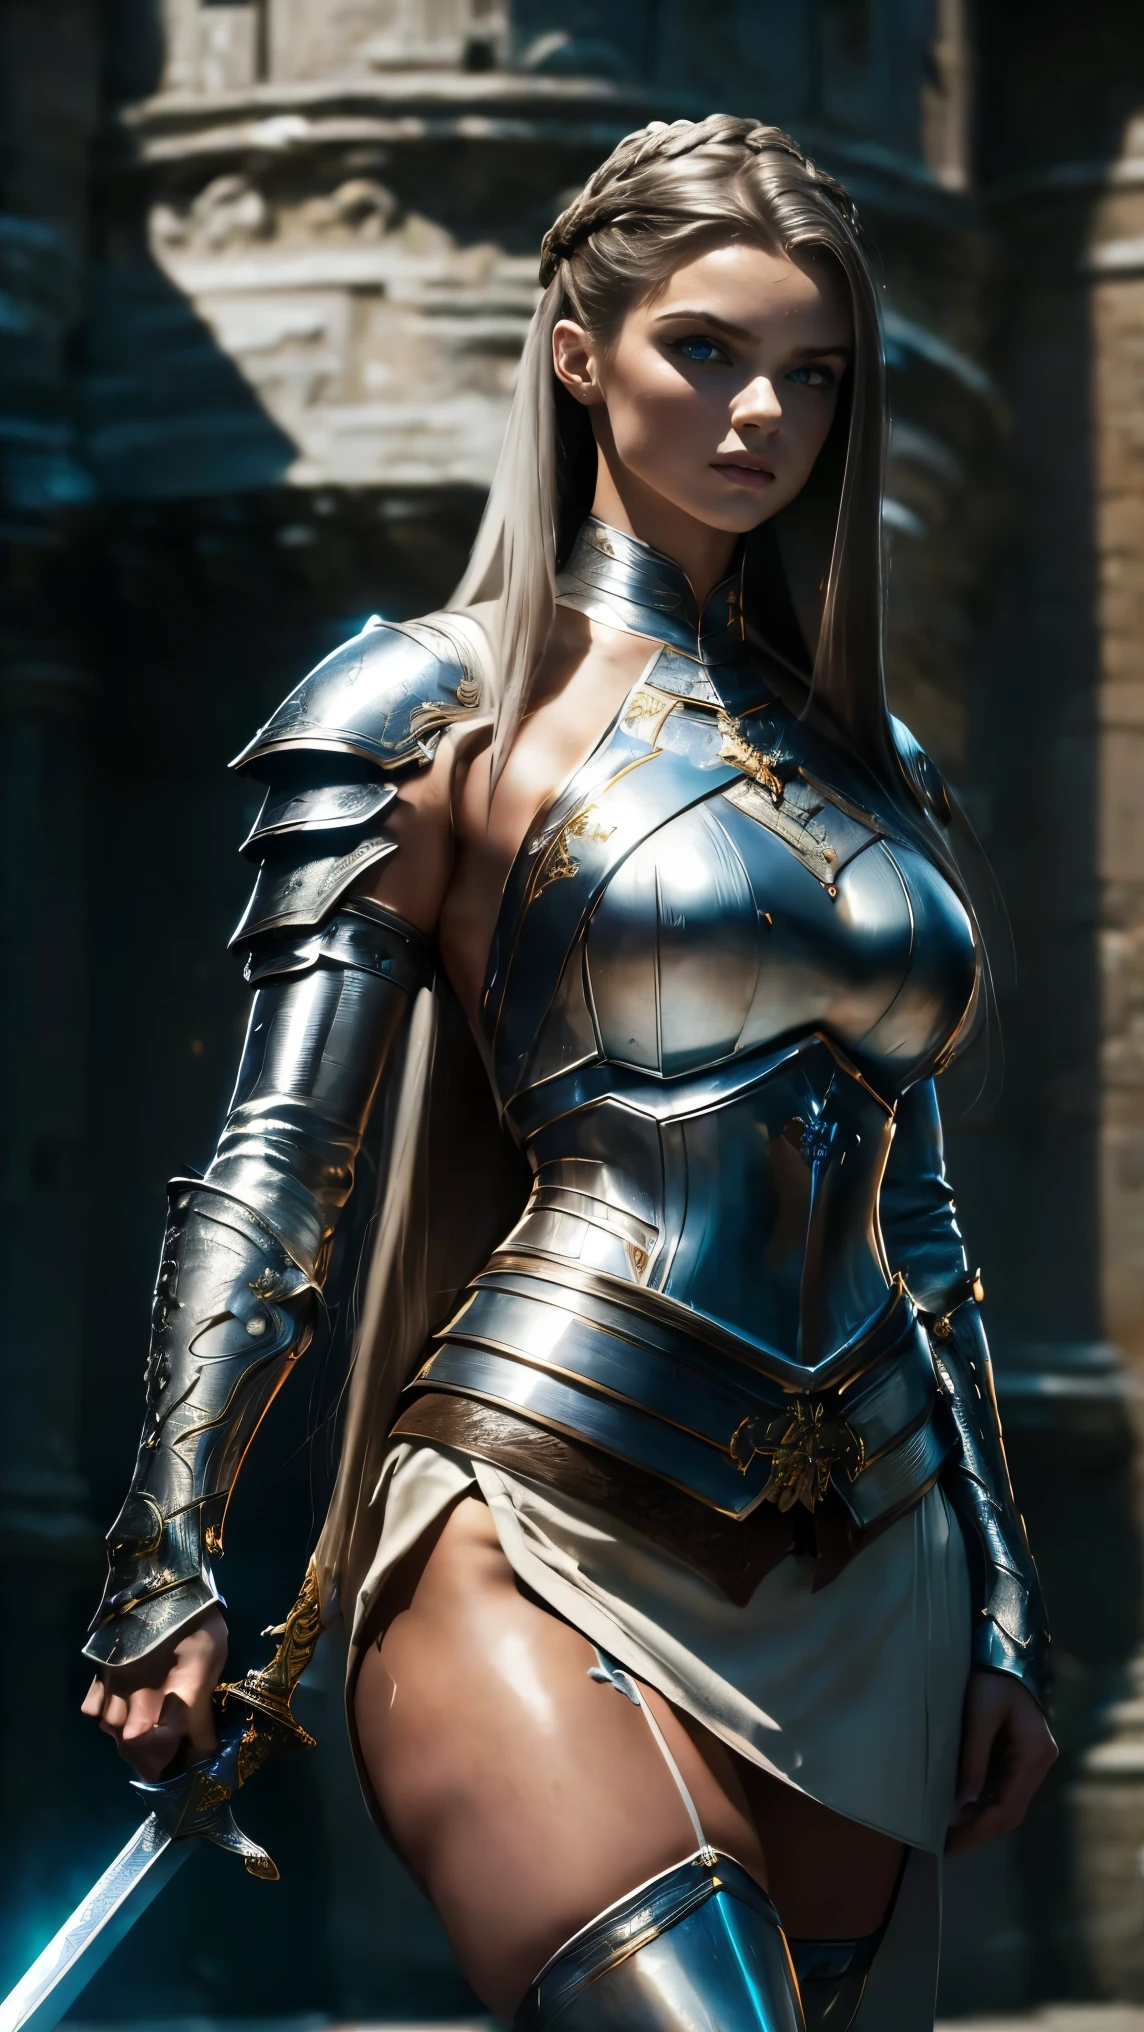 (masterpiece:1.4), best quality, hyper quality, refined rendering, highly detailed, super fine illustration, highres, ultra-detailed, detailed face, stunning art, best aesthetic, amazing, high resolution, UHD, 1girl, (((full body, full body shot, strong look, haughty expression))), Female knight princess, (mature woman:1.2), (((perfect face, pretty face, frown, encouraged look))) (muscular:1.2), fit, (wearing light armor:1.3, highly decorated armor, delicate details, white mini skirt, intrincate skirt design, leather straps, highly detailed clothes, aromored over knee boots), blue eyes, ((Long hair, platinum brown hair, ponyatil:1.4)), warrior look, Setting is a mediaval town, exposed navel, (abs:1.2, exposed abs), Highly detailed, european, leg muscles, (bulky:1.2), leather straps, (large breasts:1.3), waist up, wide waist, bubble butt, stocky, (tall:1.4), (((holding sword, kinght sword, decorated sword))), castle background, depth of field, 8k, sharp focus, cinematic lighting, fill lighting, indirect ambience lighting,